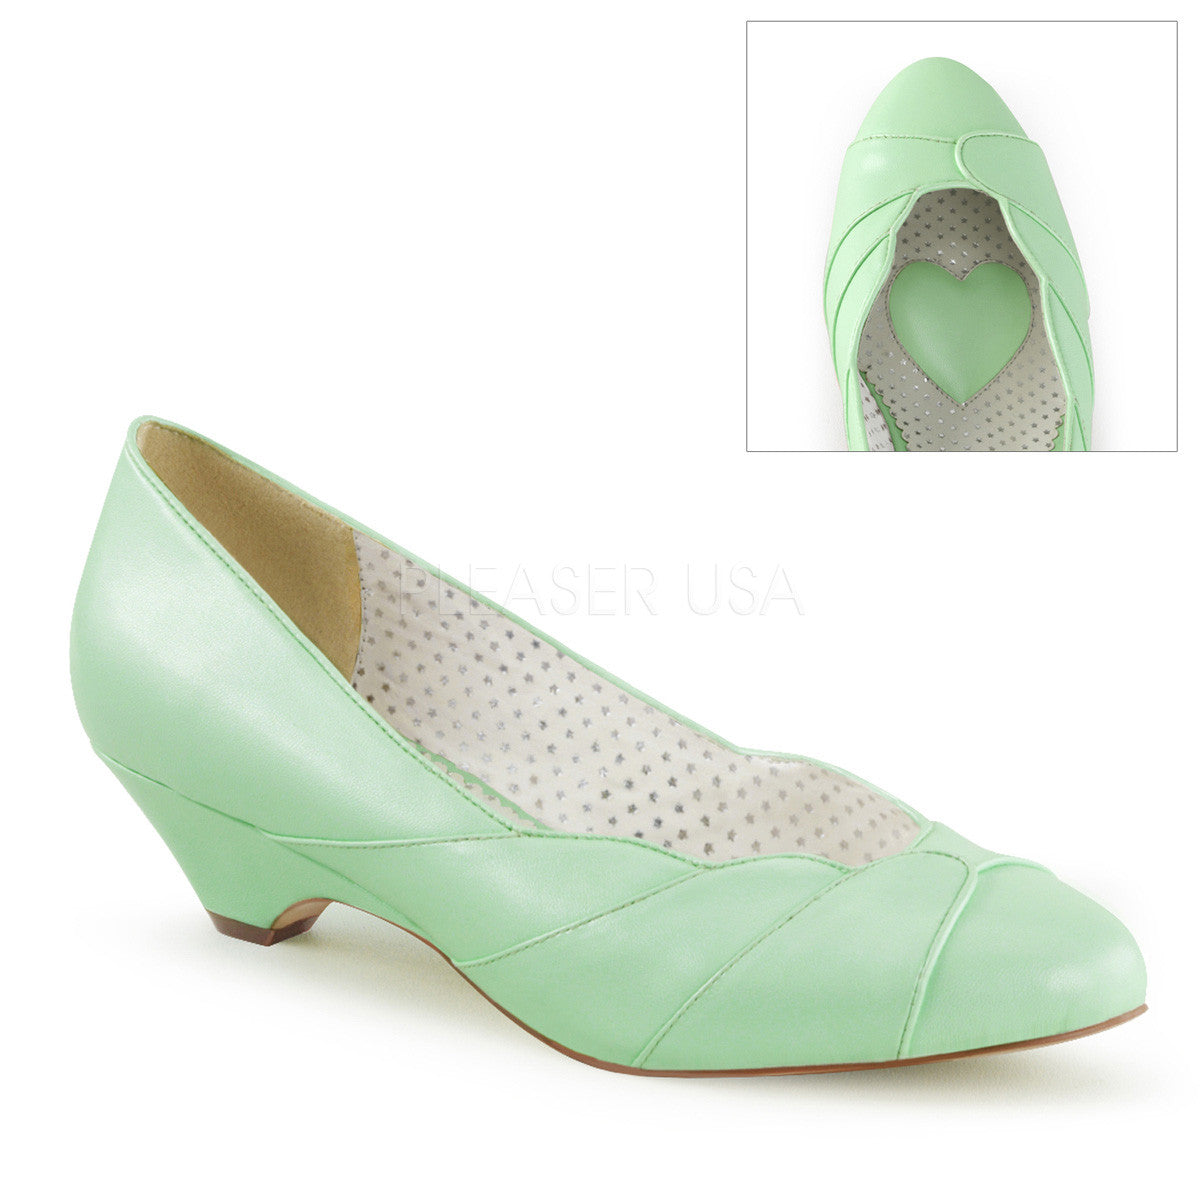 Pin Up Couture LULU-05 Mint Retro-Inspired Pumps - Shoecup.com - 1